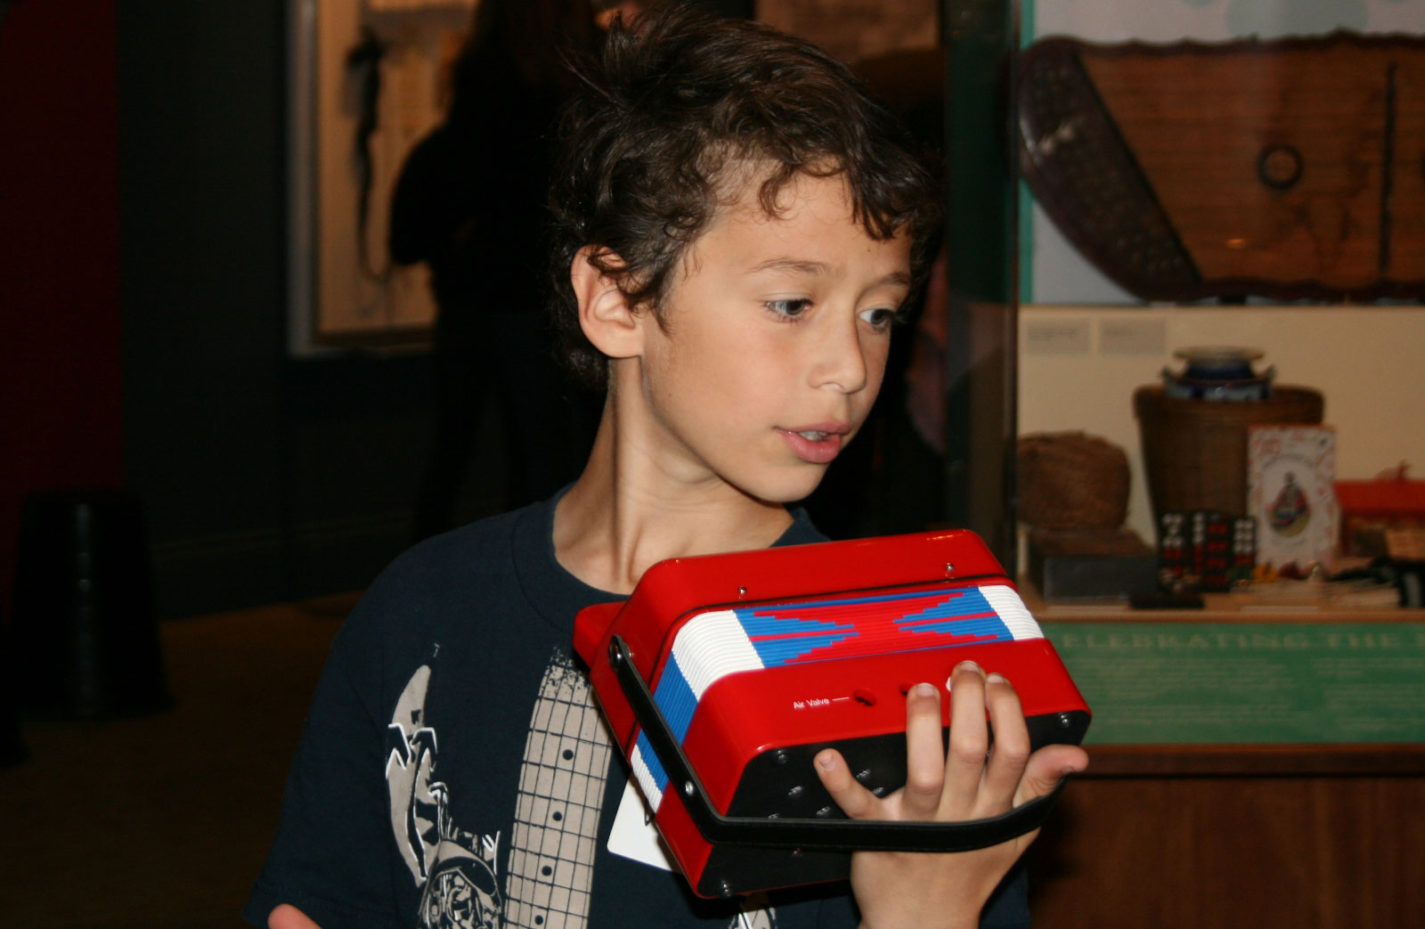 A young student plays a toy accordion at the People from Many Places exhibit at the San Mateo County History Museum